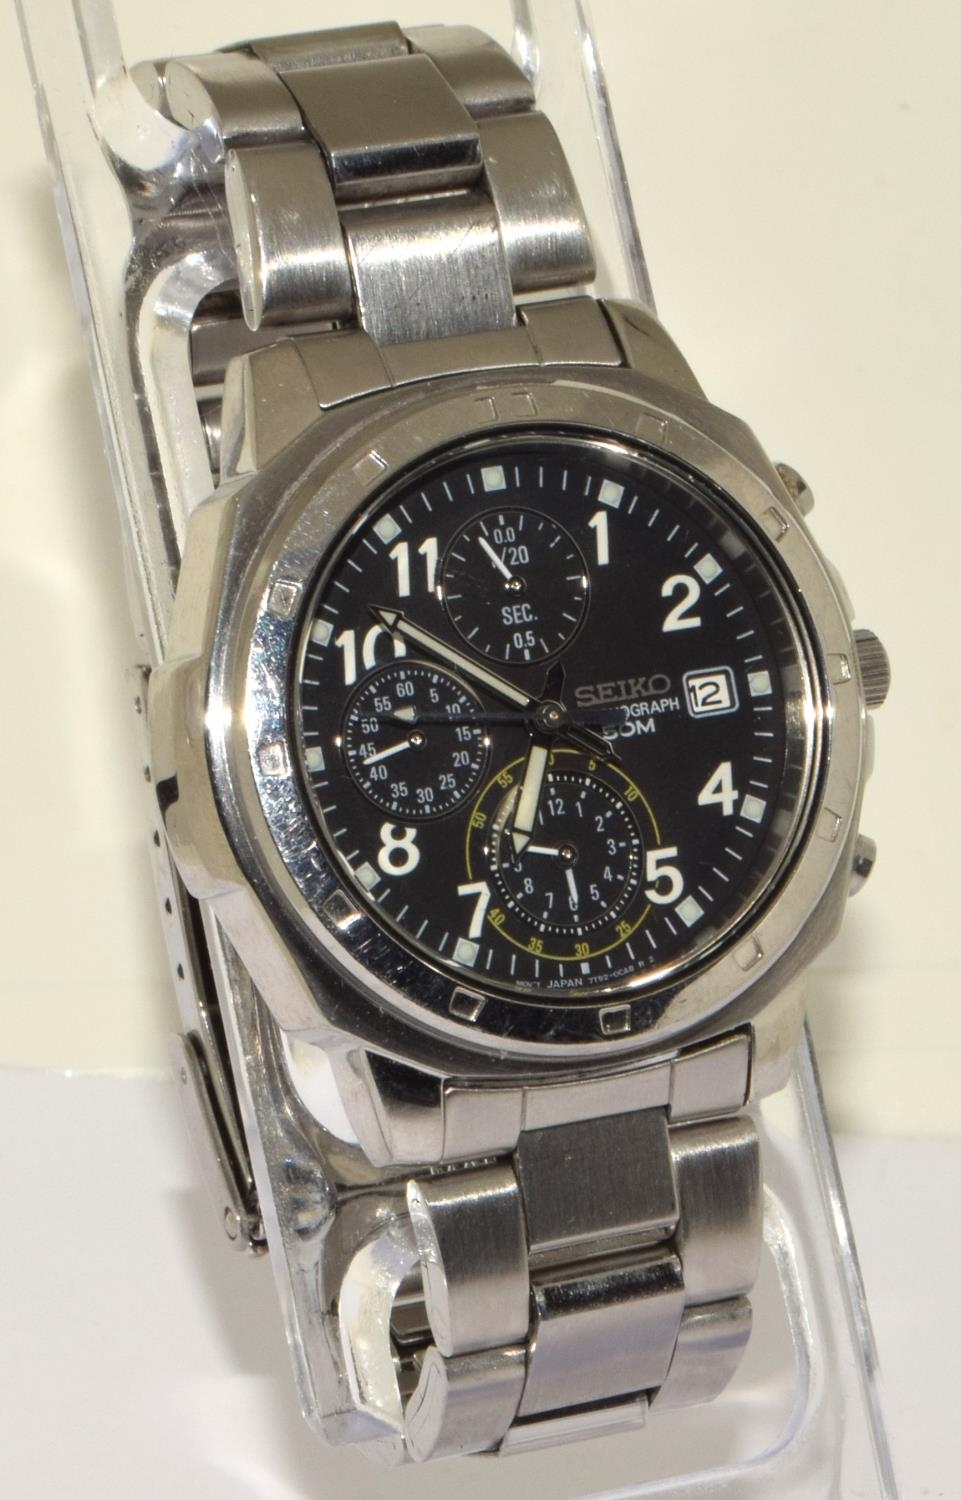 Seiko quartz Chronograph ref:7T92-0CA0 on stainless steel strap. Working when catalogued. (ref:14)